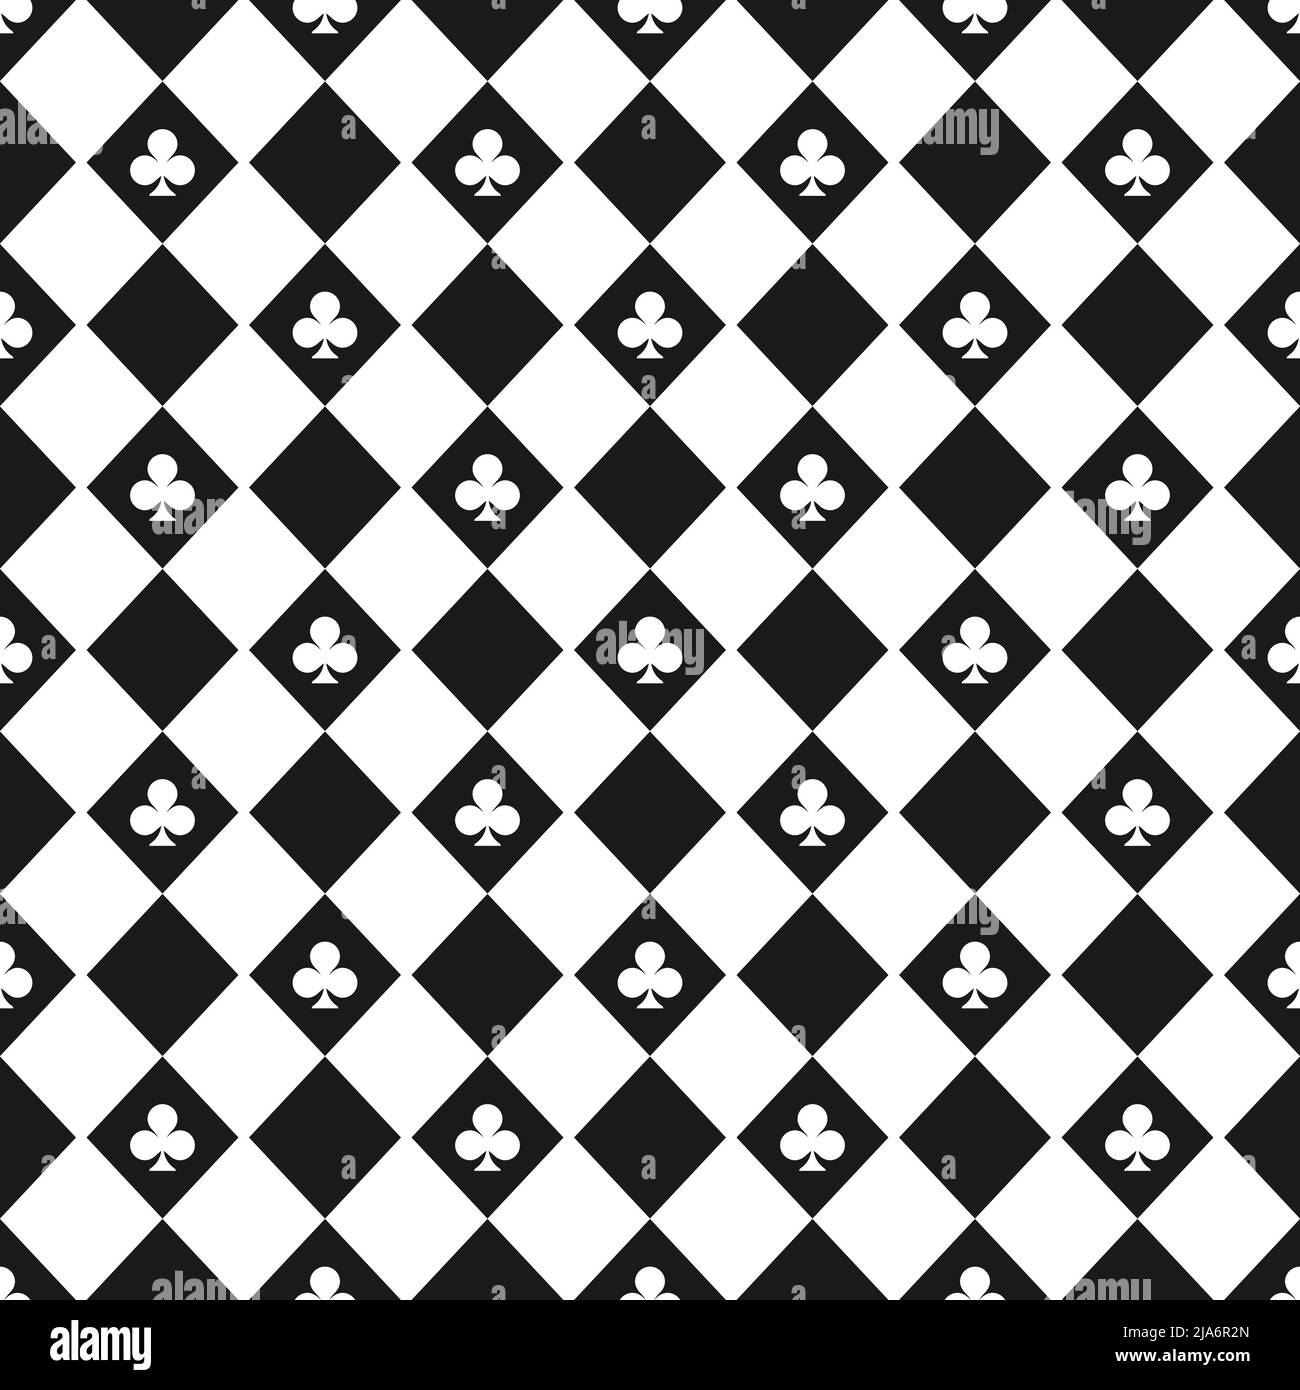 Seamless pattern with clubs. Casino gambling, poker background. Alice in wonderland ornament. Fantasy wallpaper. Stock Vector